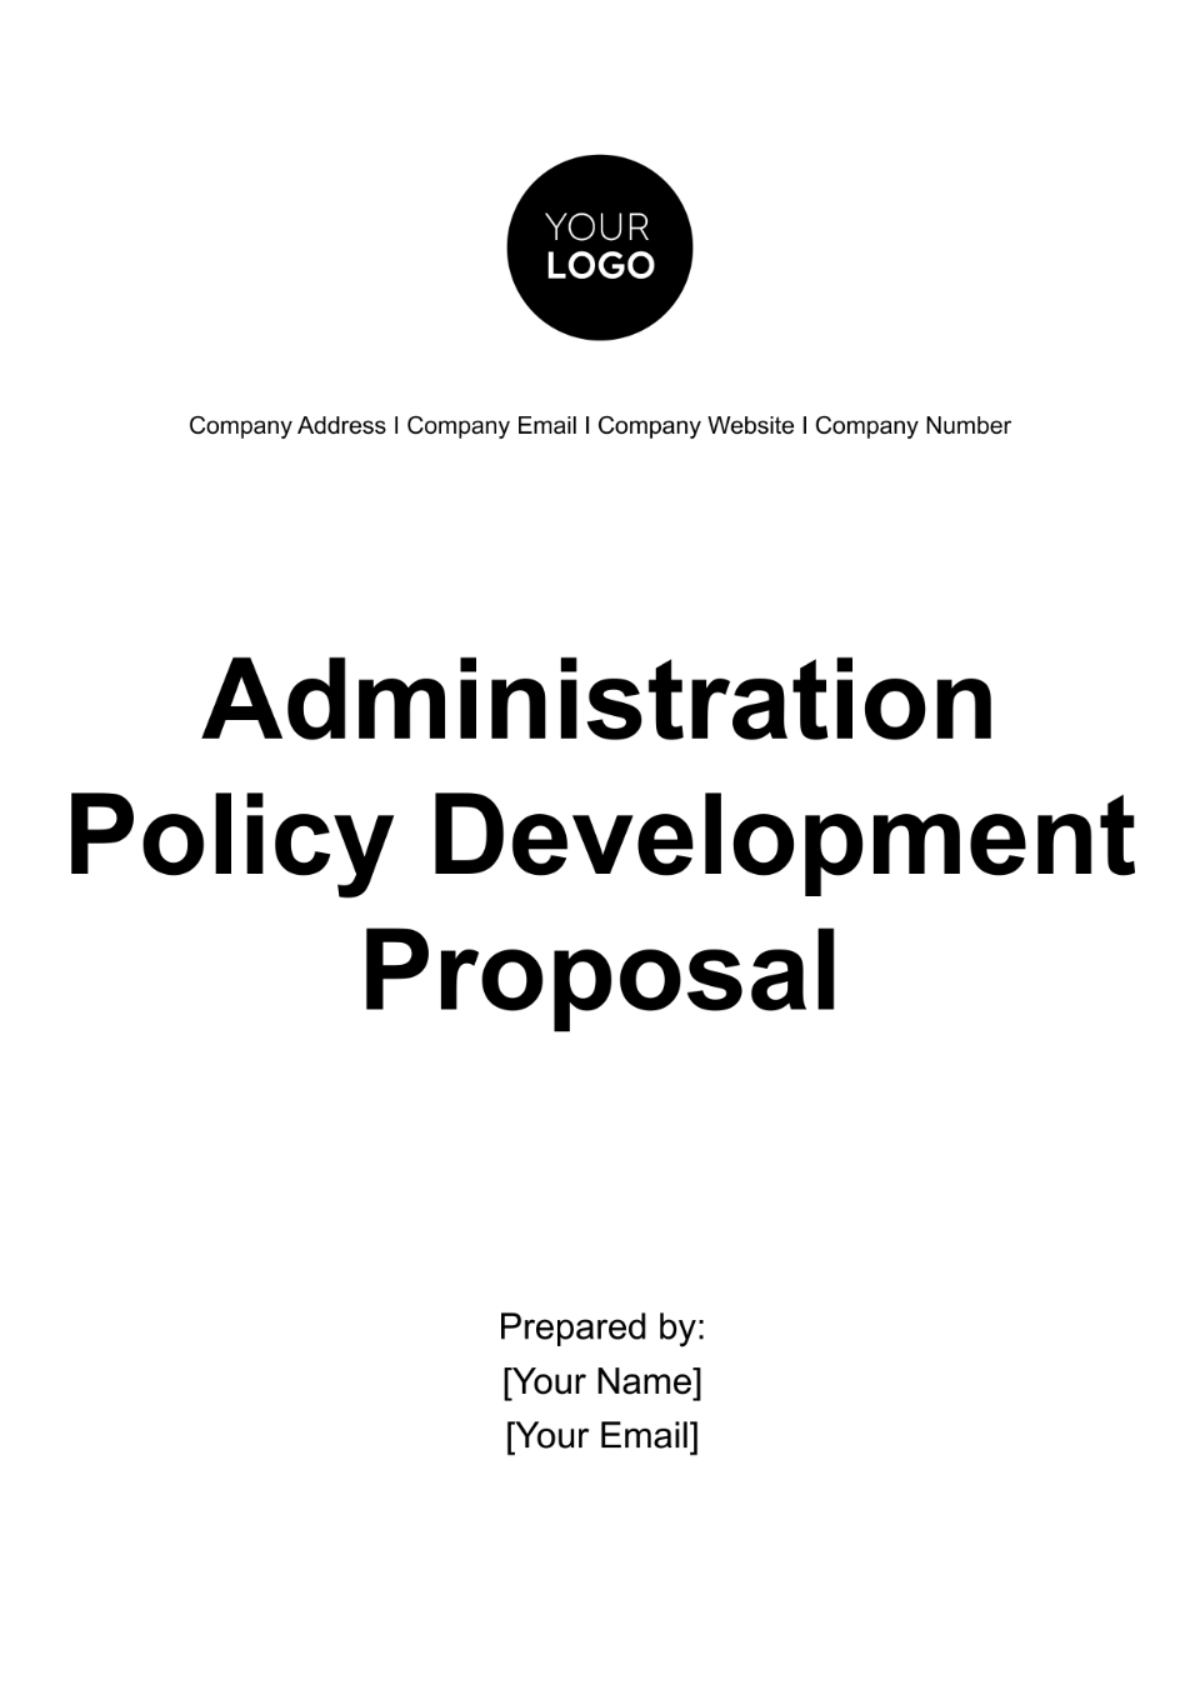 Administration Policy Development Proposal Template